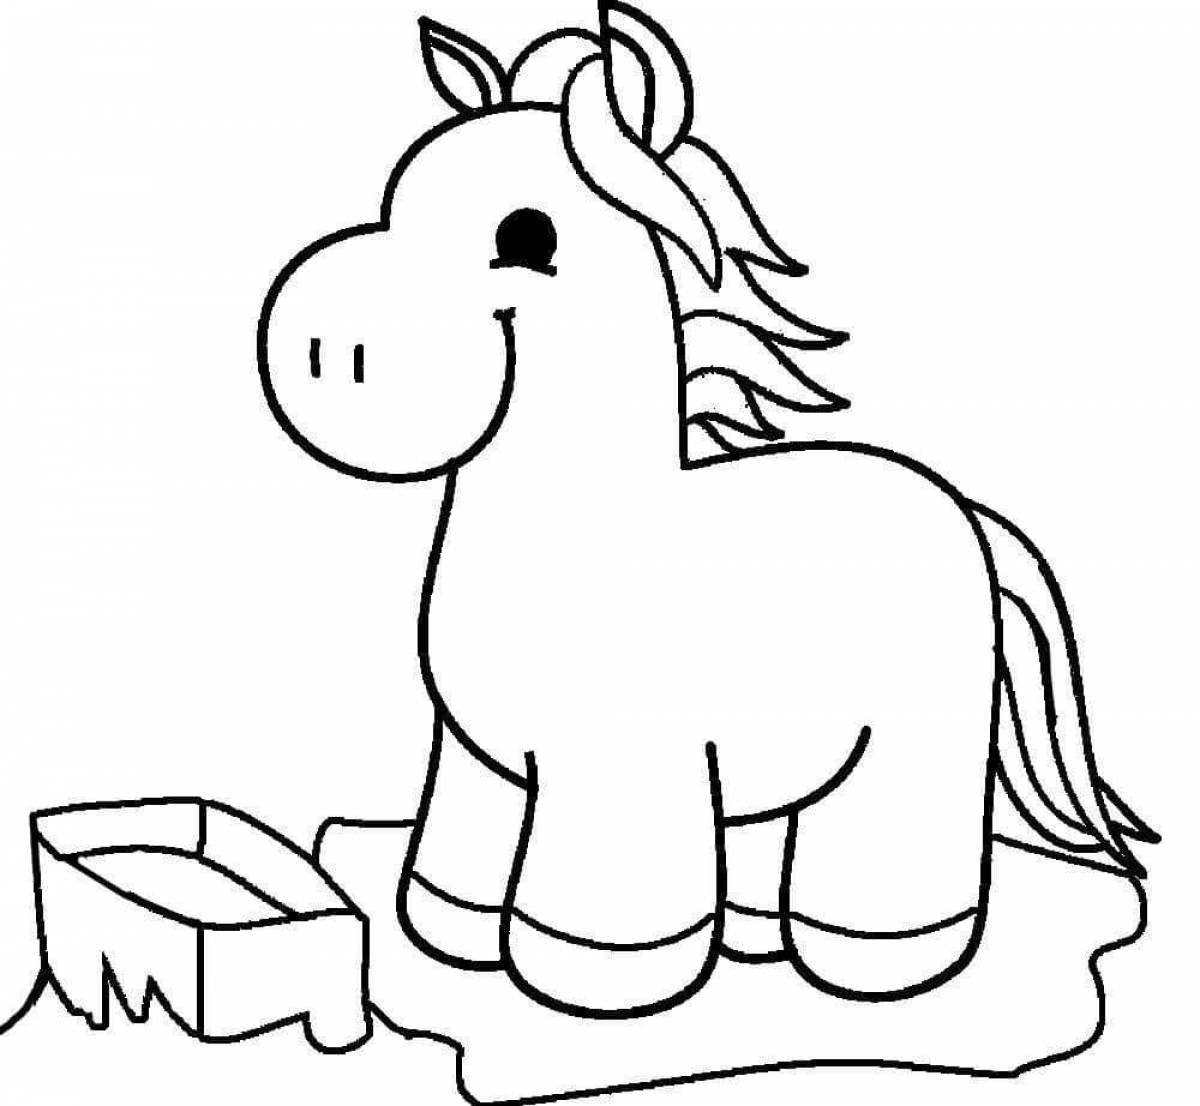 Coloring pages for girls 2 years old